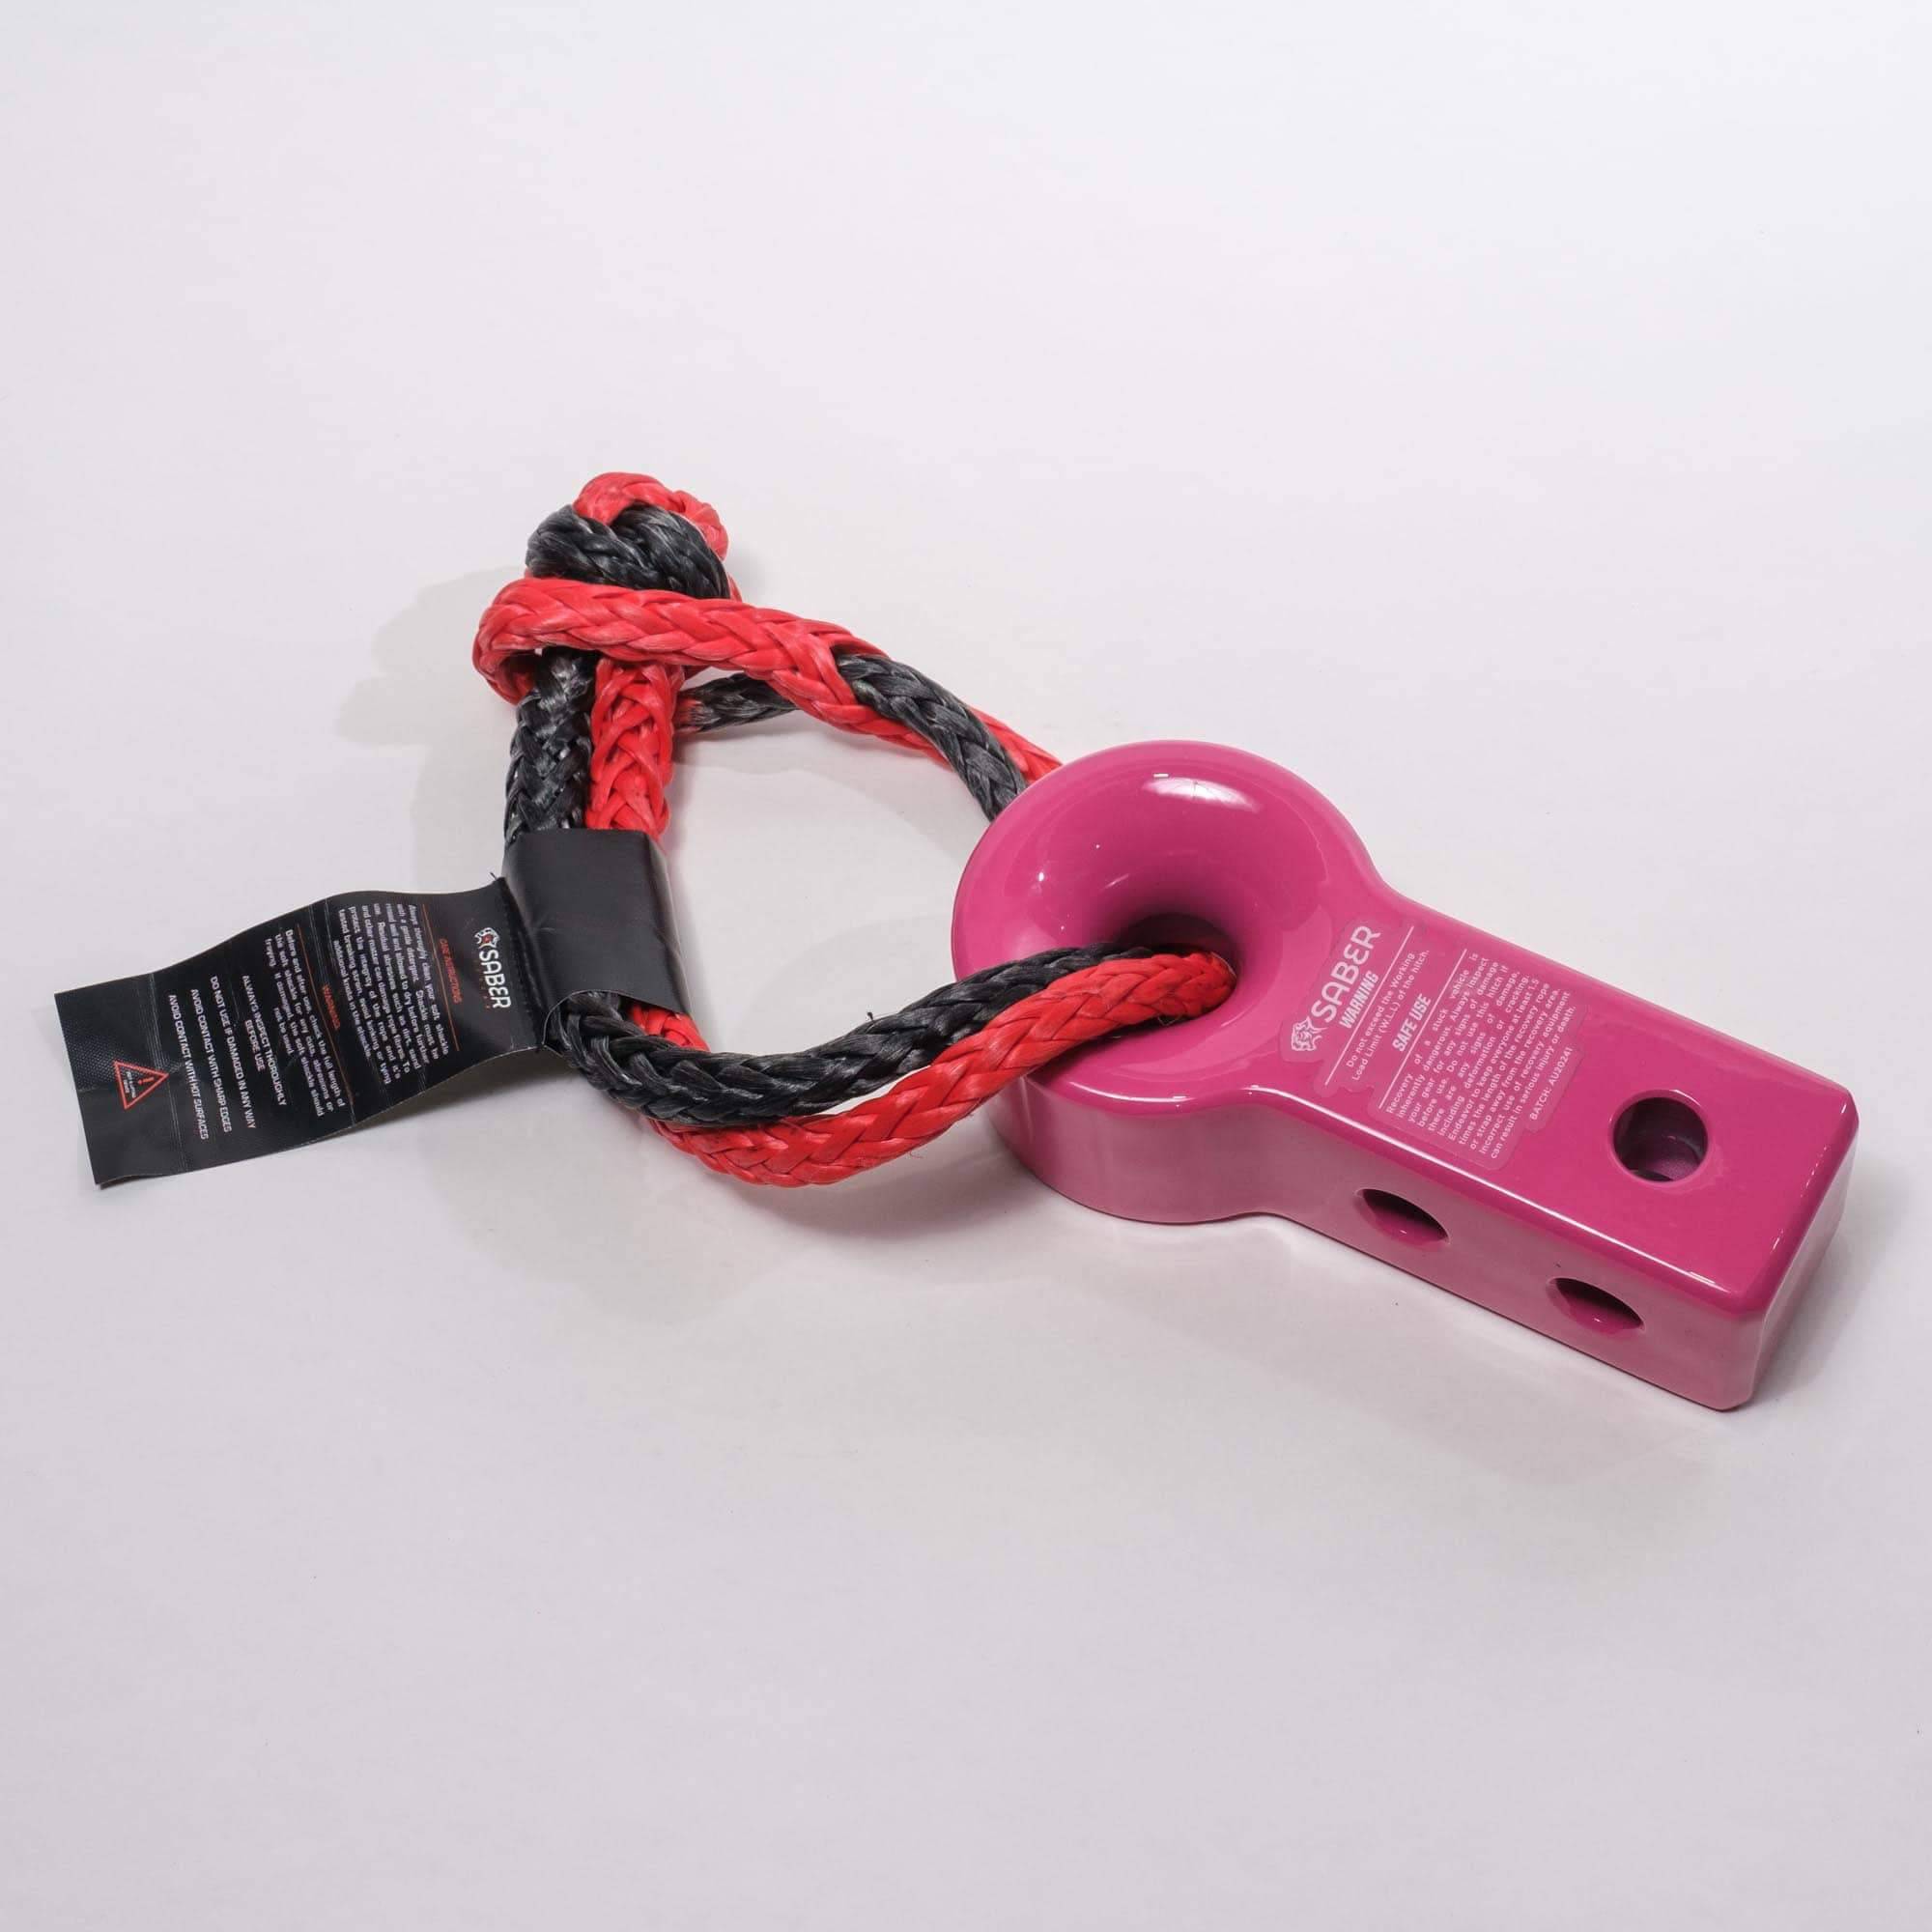 Saber Offroad 7075 Soft Shackle Only Aluminium Recovery Hitch – Prismatic Pink & 9K Soft Shackle | Saber Offroad